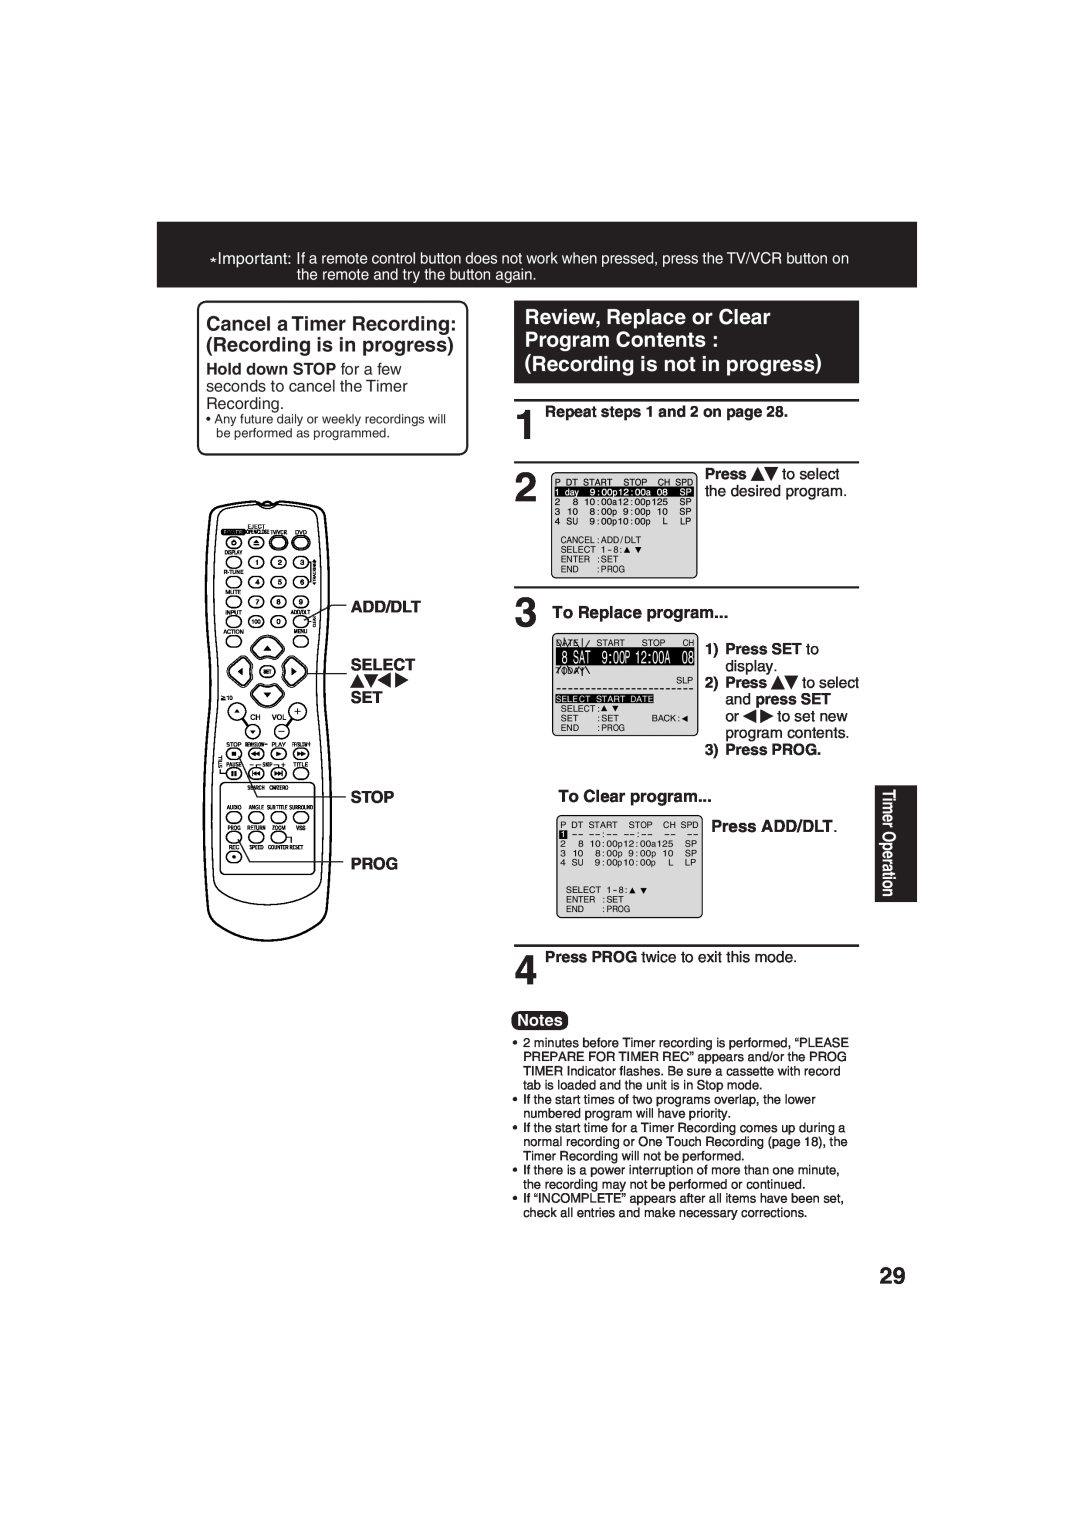 Panasonic PV-DF273 Cancel a Timer Recording Recording is in progress, Add/Dlt Select Set Stop Prog, To Replace program 